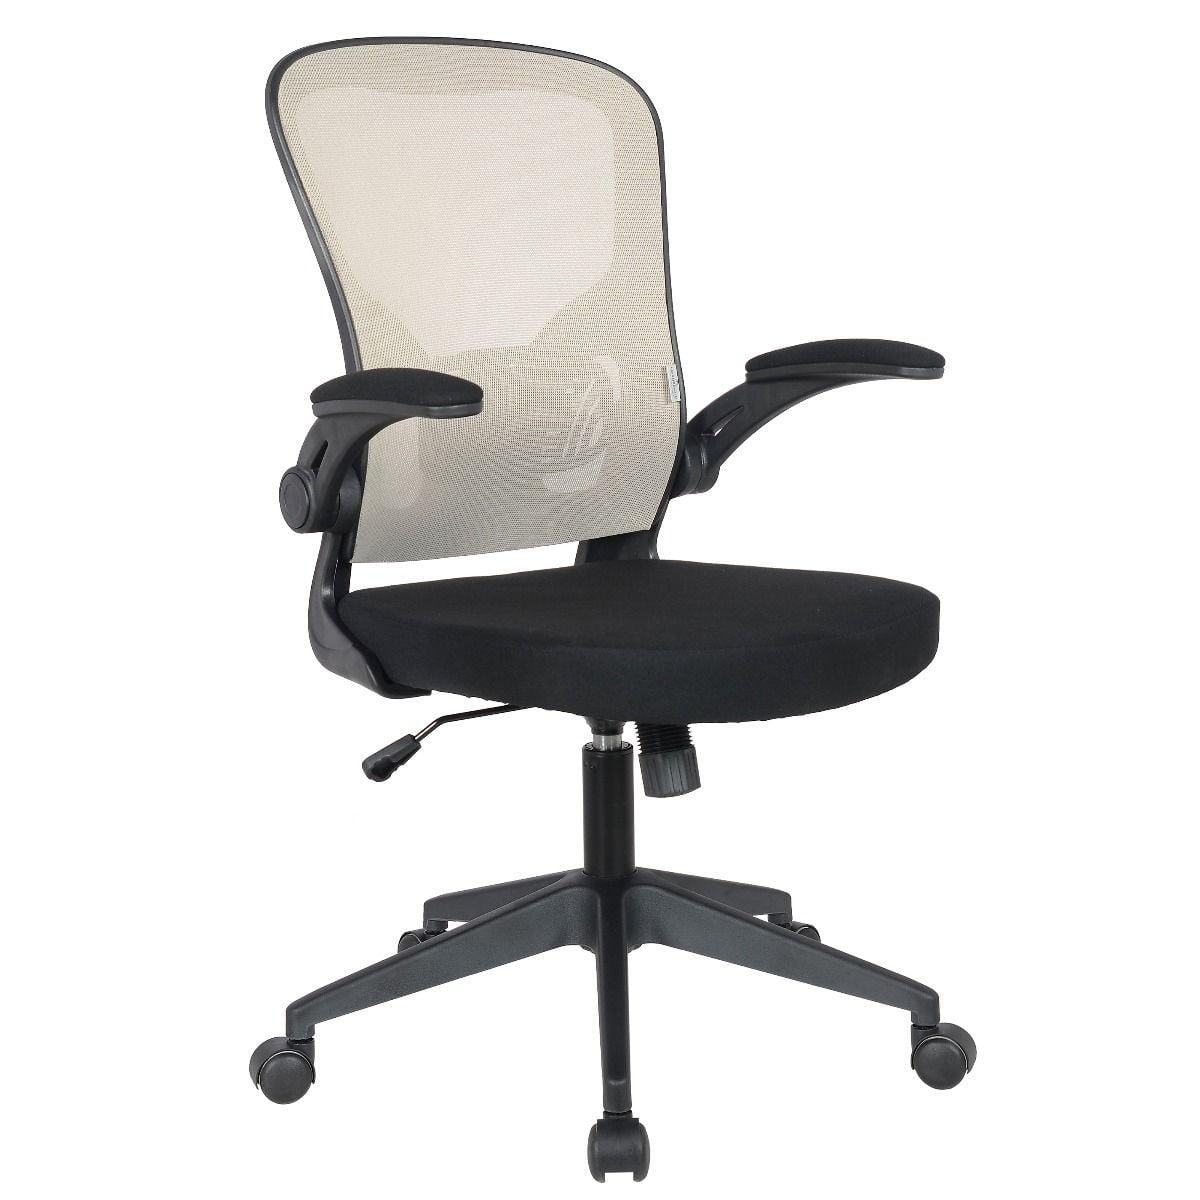 Newton Beige Mesh Adjustable Swivel Office Chair with Flip-Up Arms